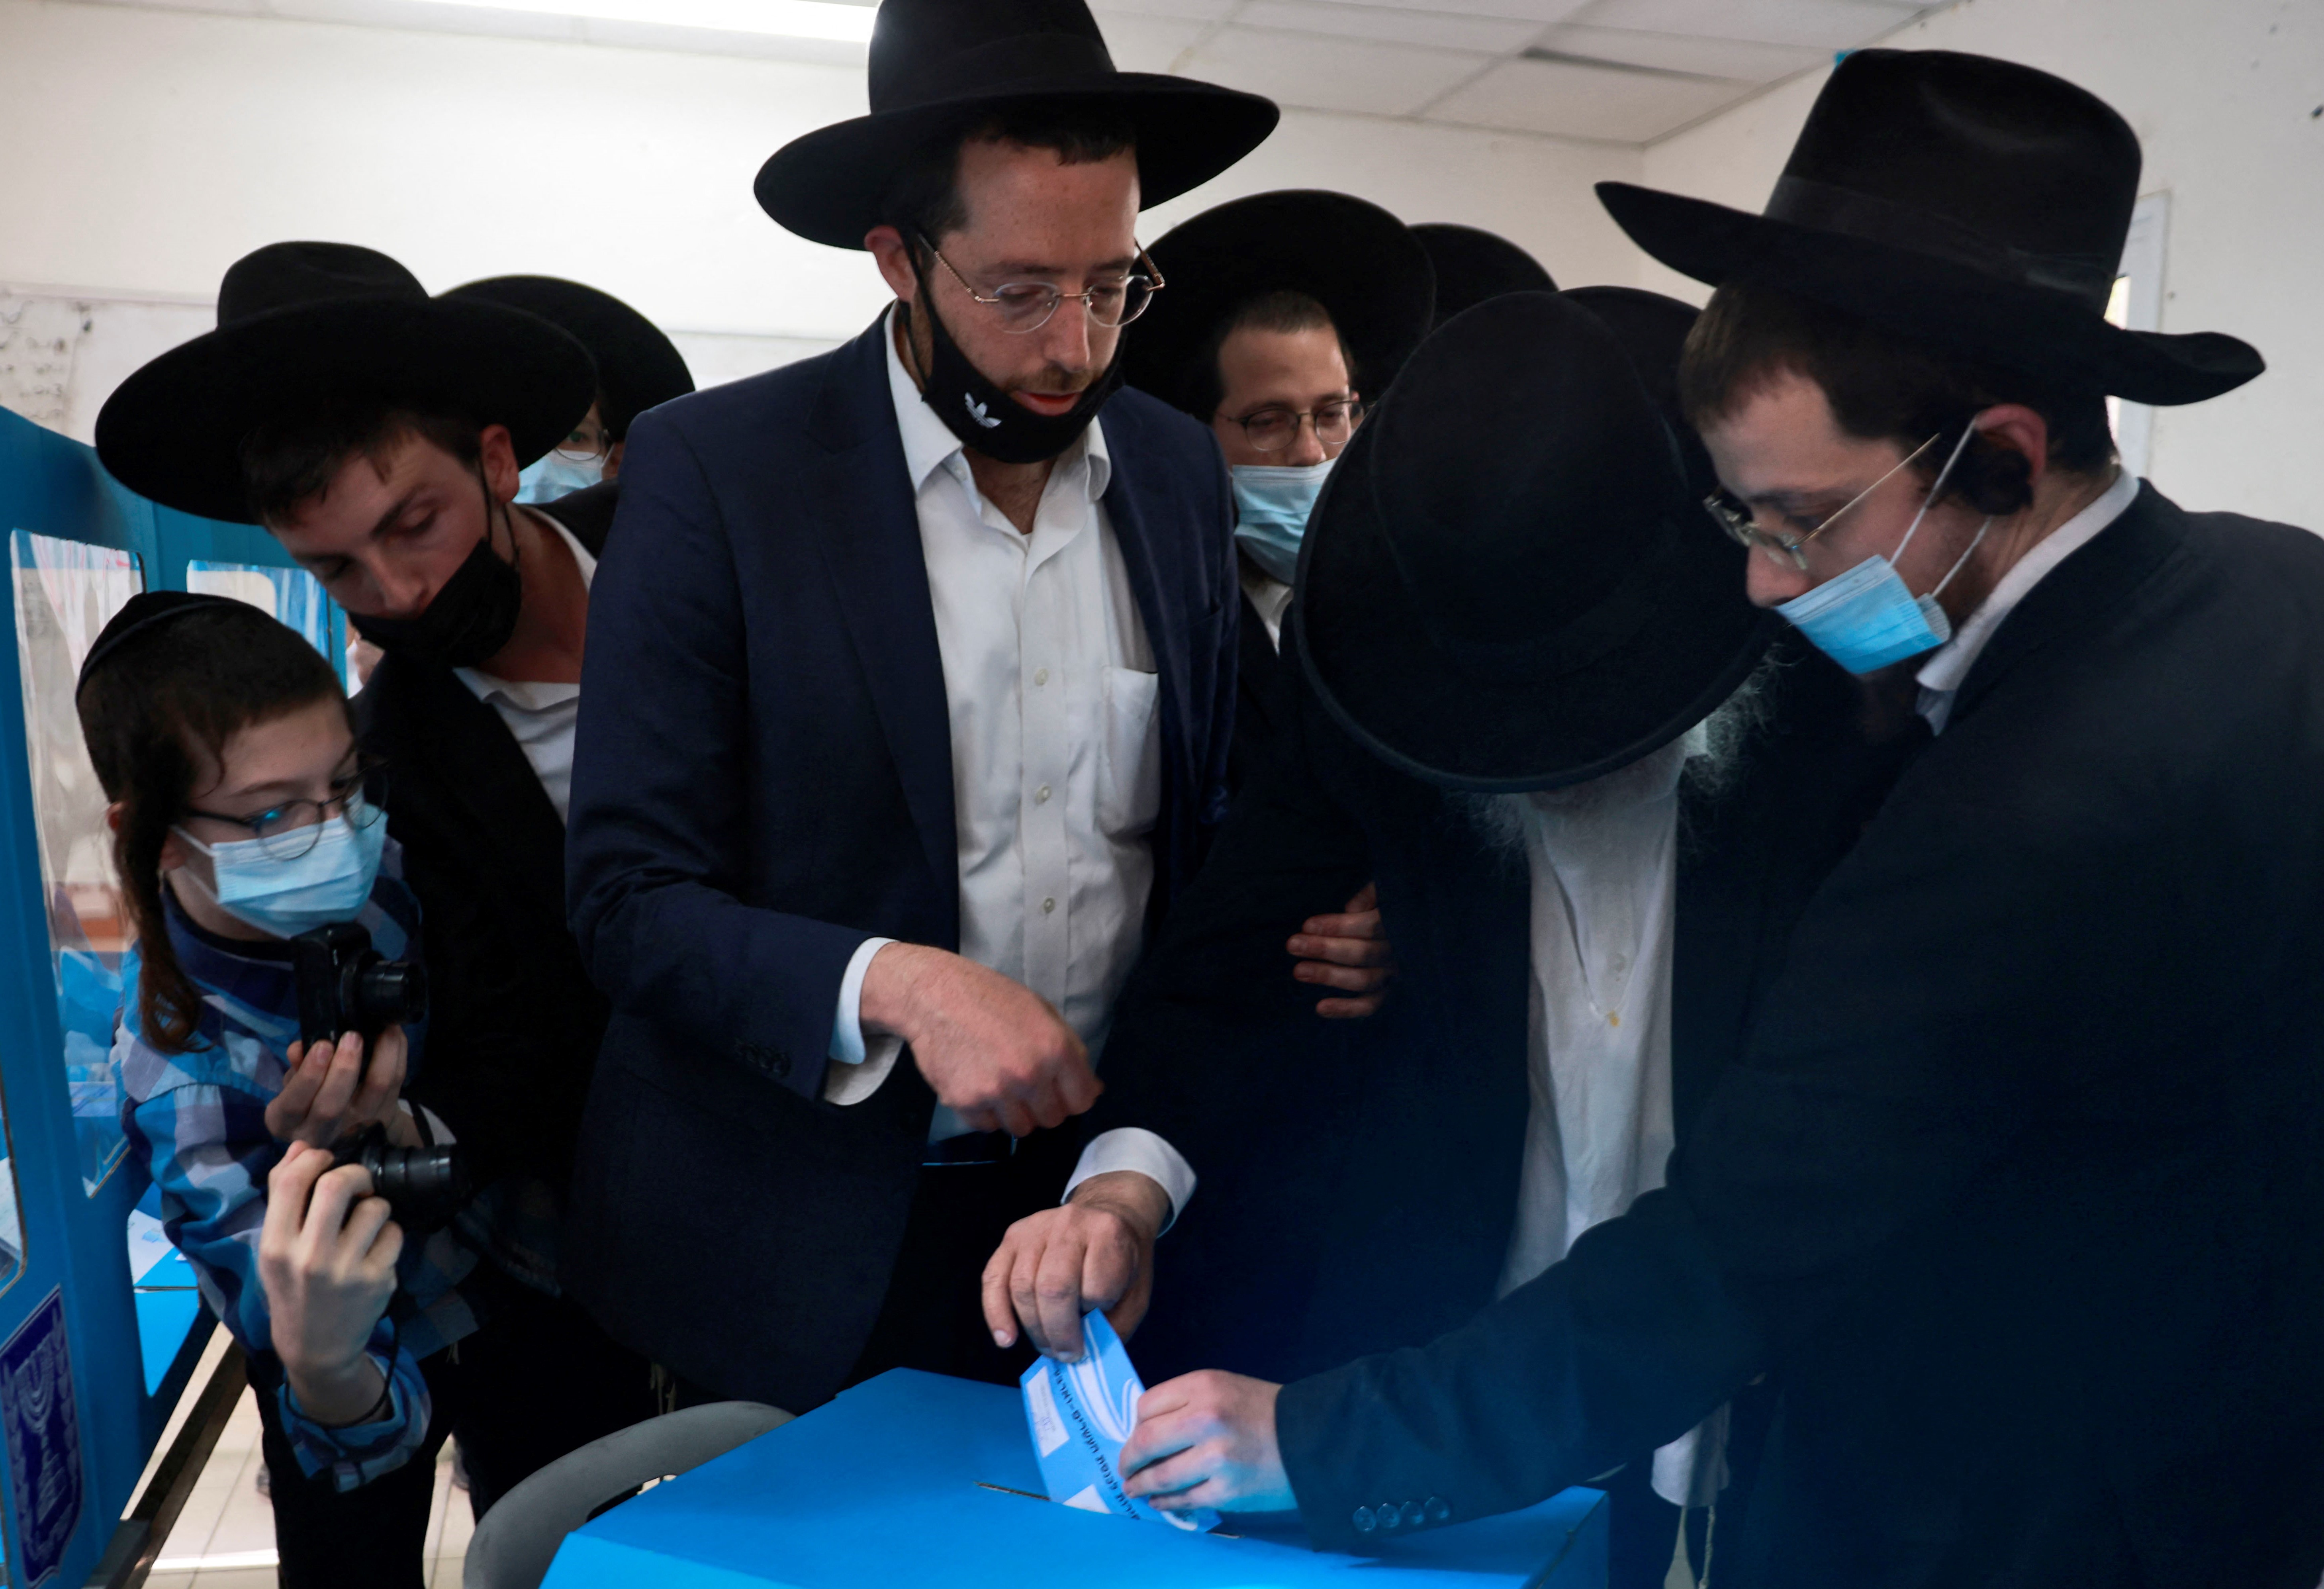 Religious Israelis cast their ballots on March 23, 2021 in the mostly Jewish ultra-Orthodox city of Bnei Brak on the fourth national election in two years.